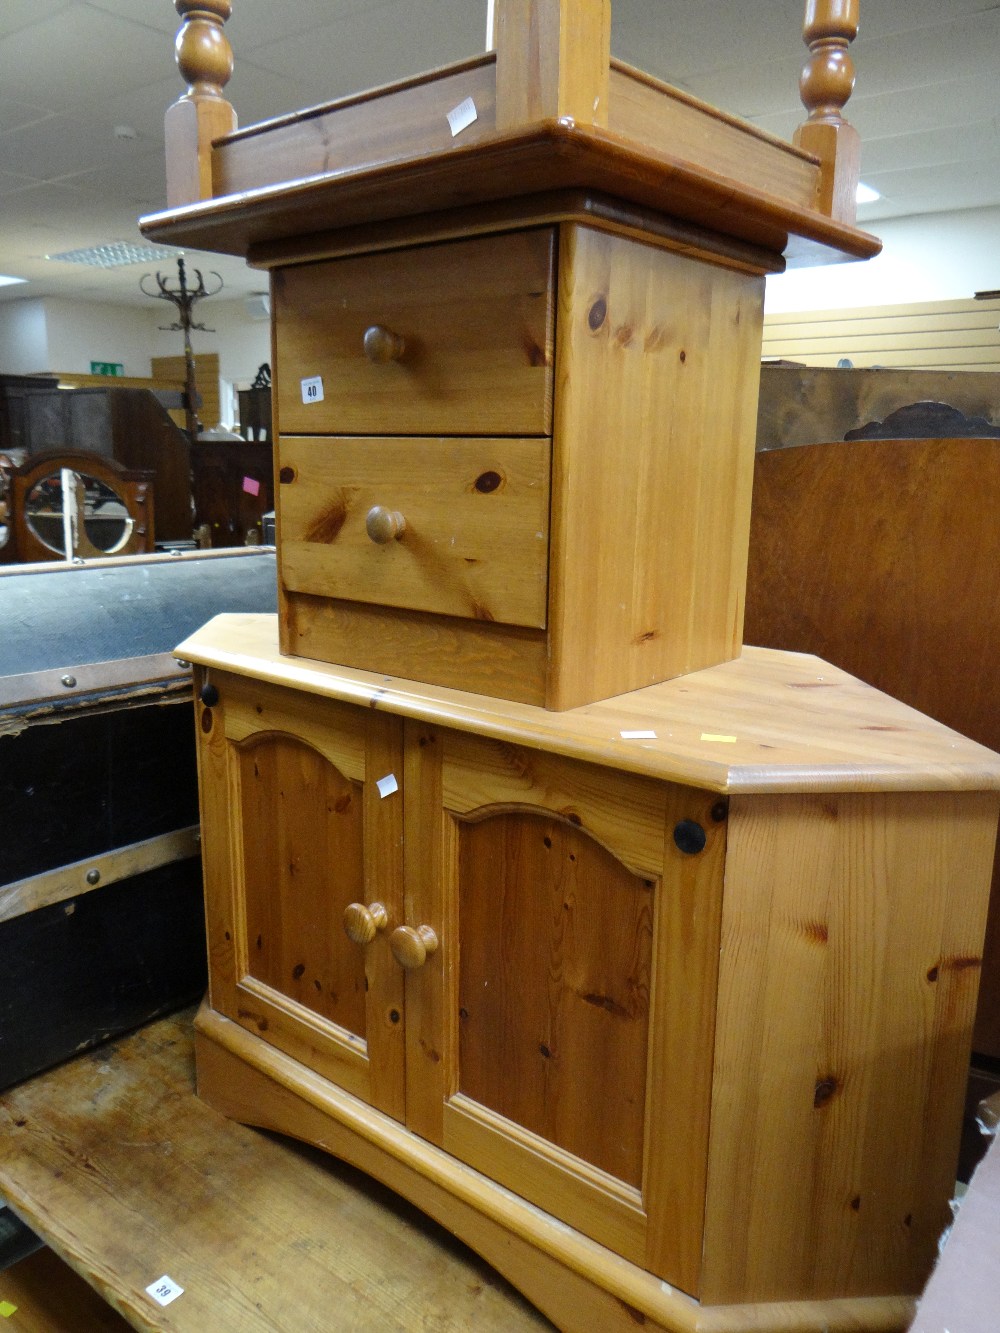 Parcel of pine including corner cupboard, entertainment stand, table & drawers etc